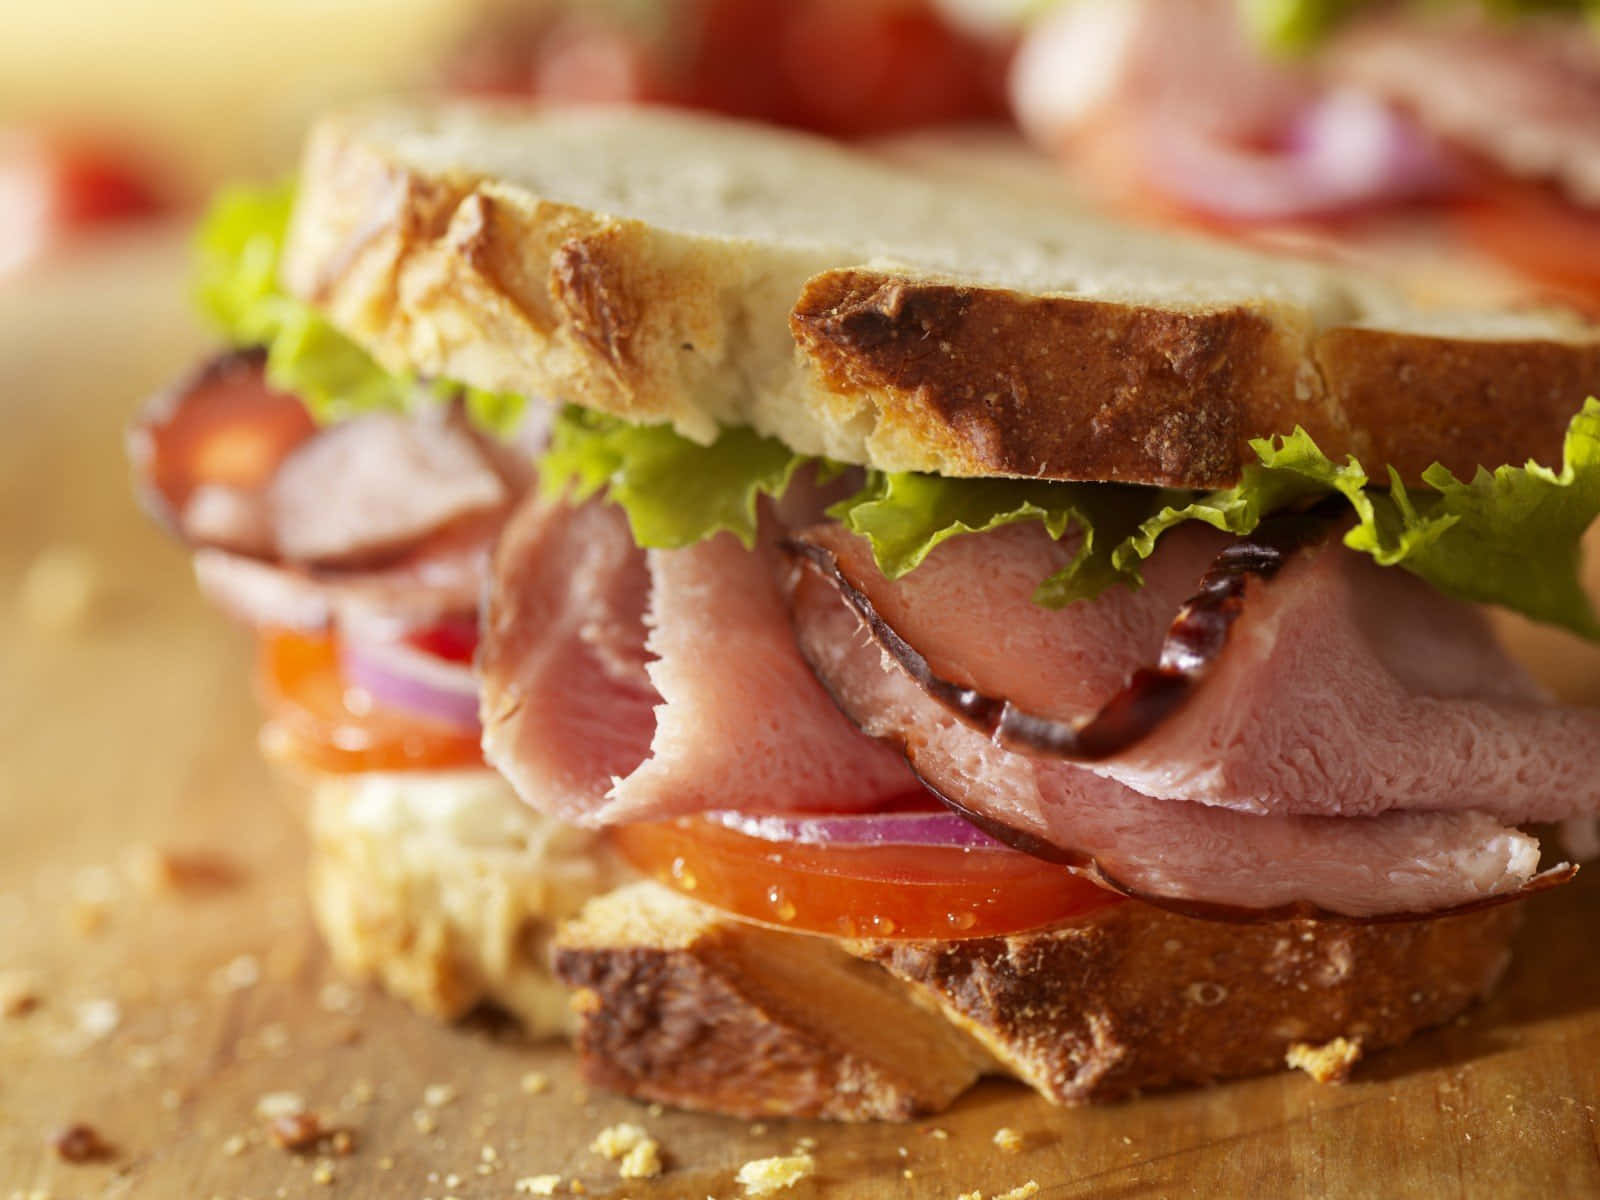 Enjoy the deliciousness of a classic Sandwich